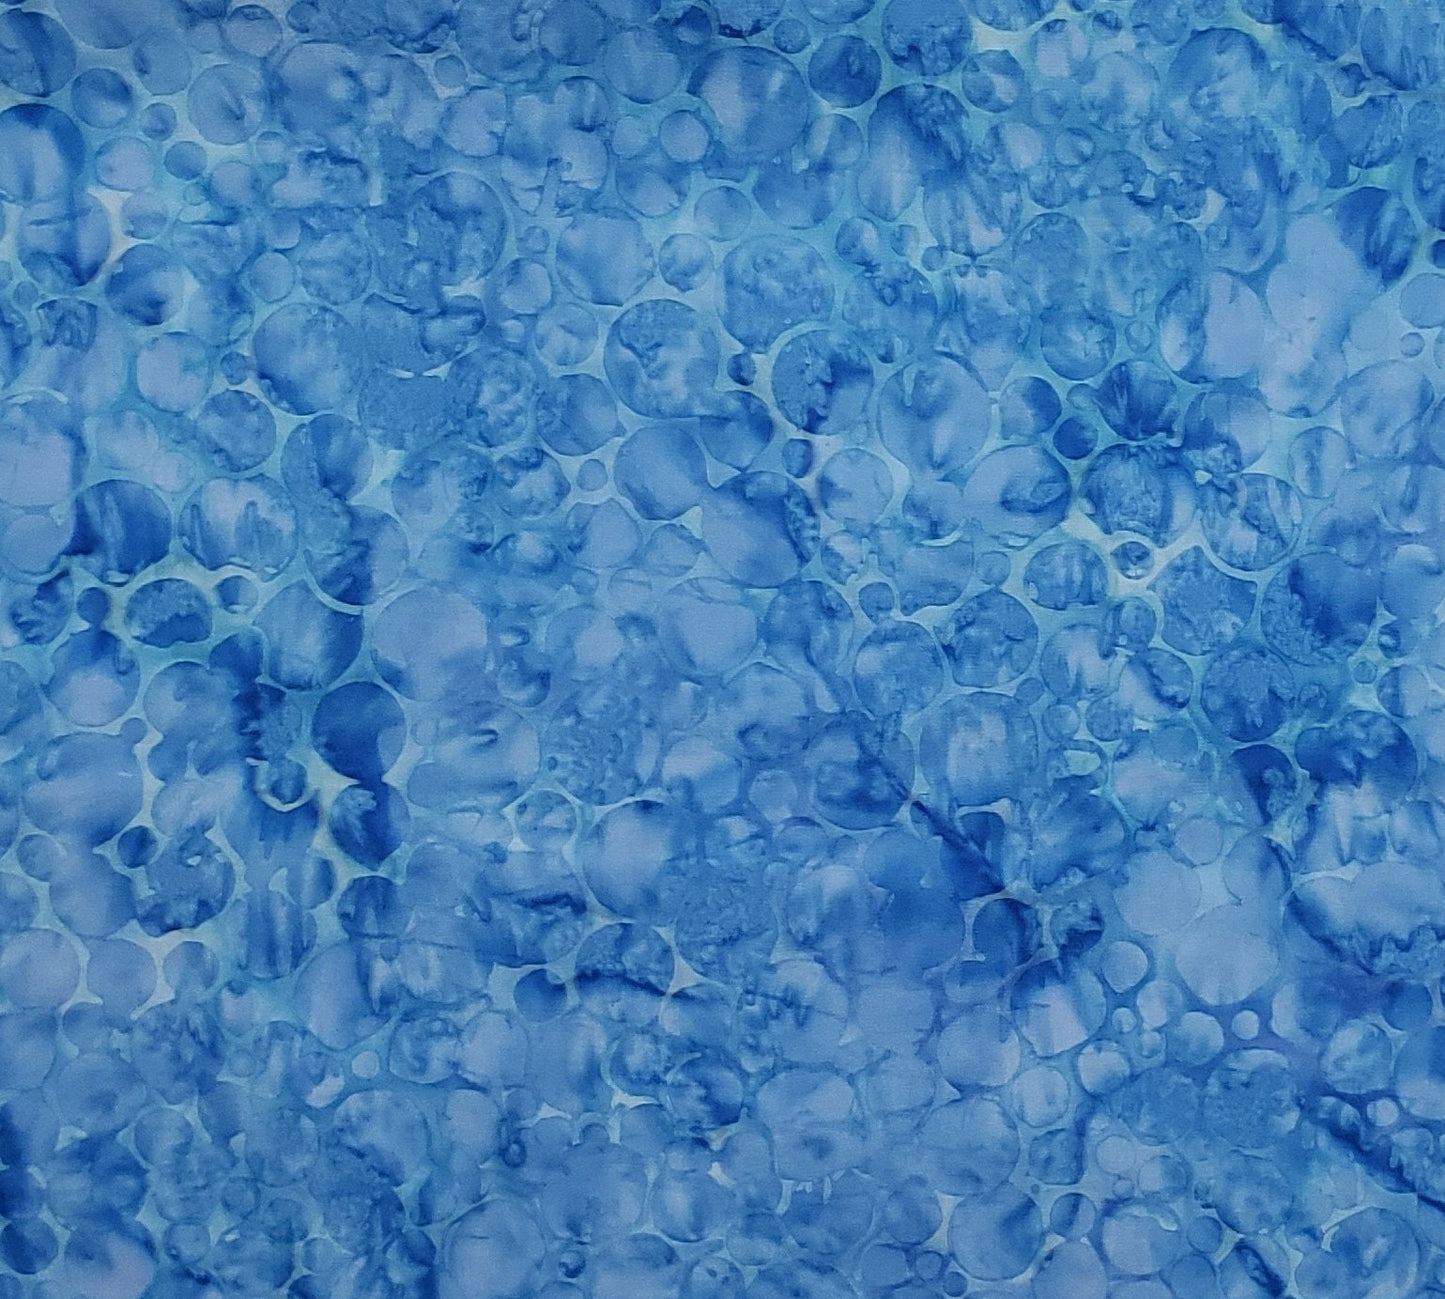 BATIK - Bright Blue Patterned Fabric with "Bubble" Pattern